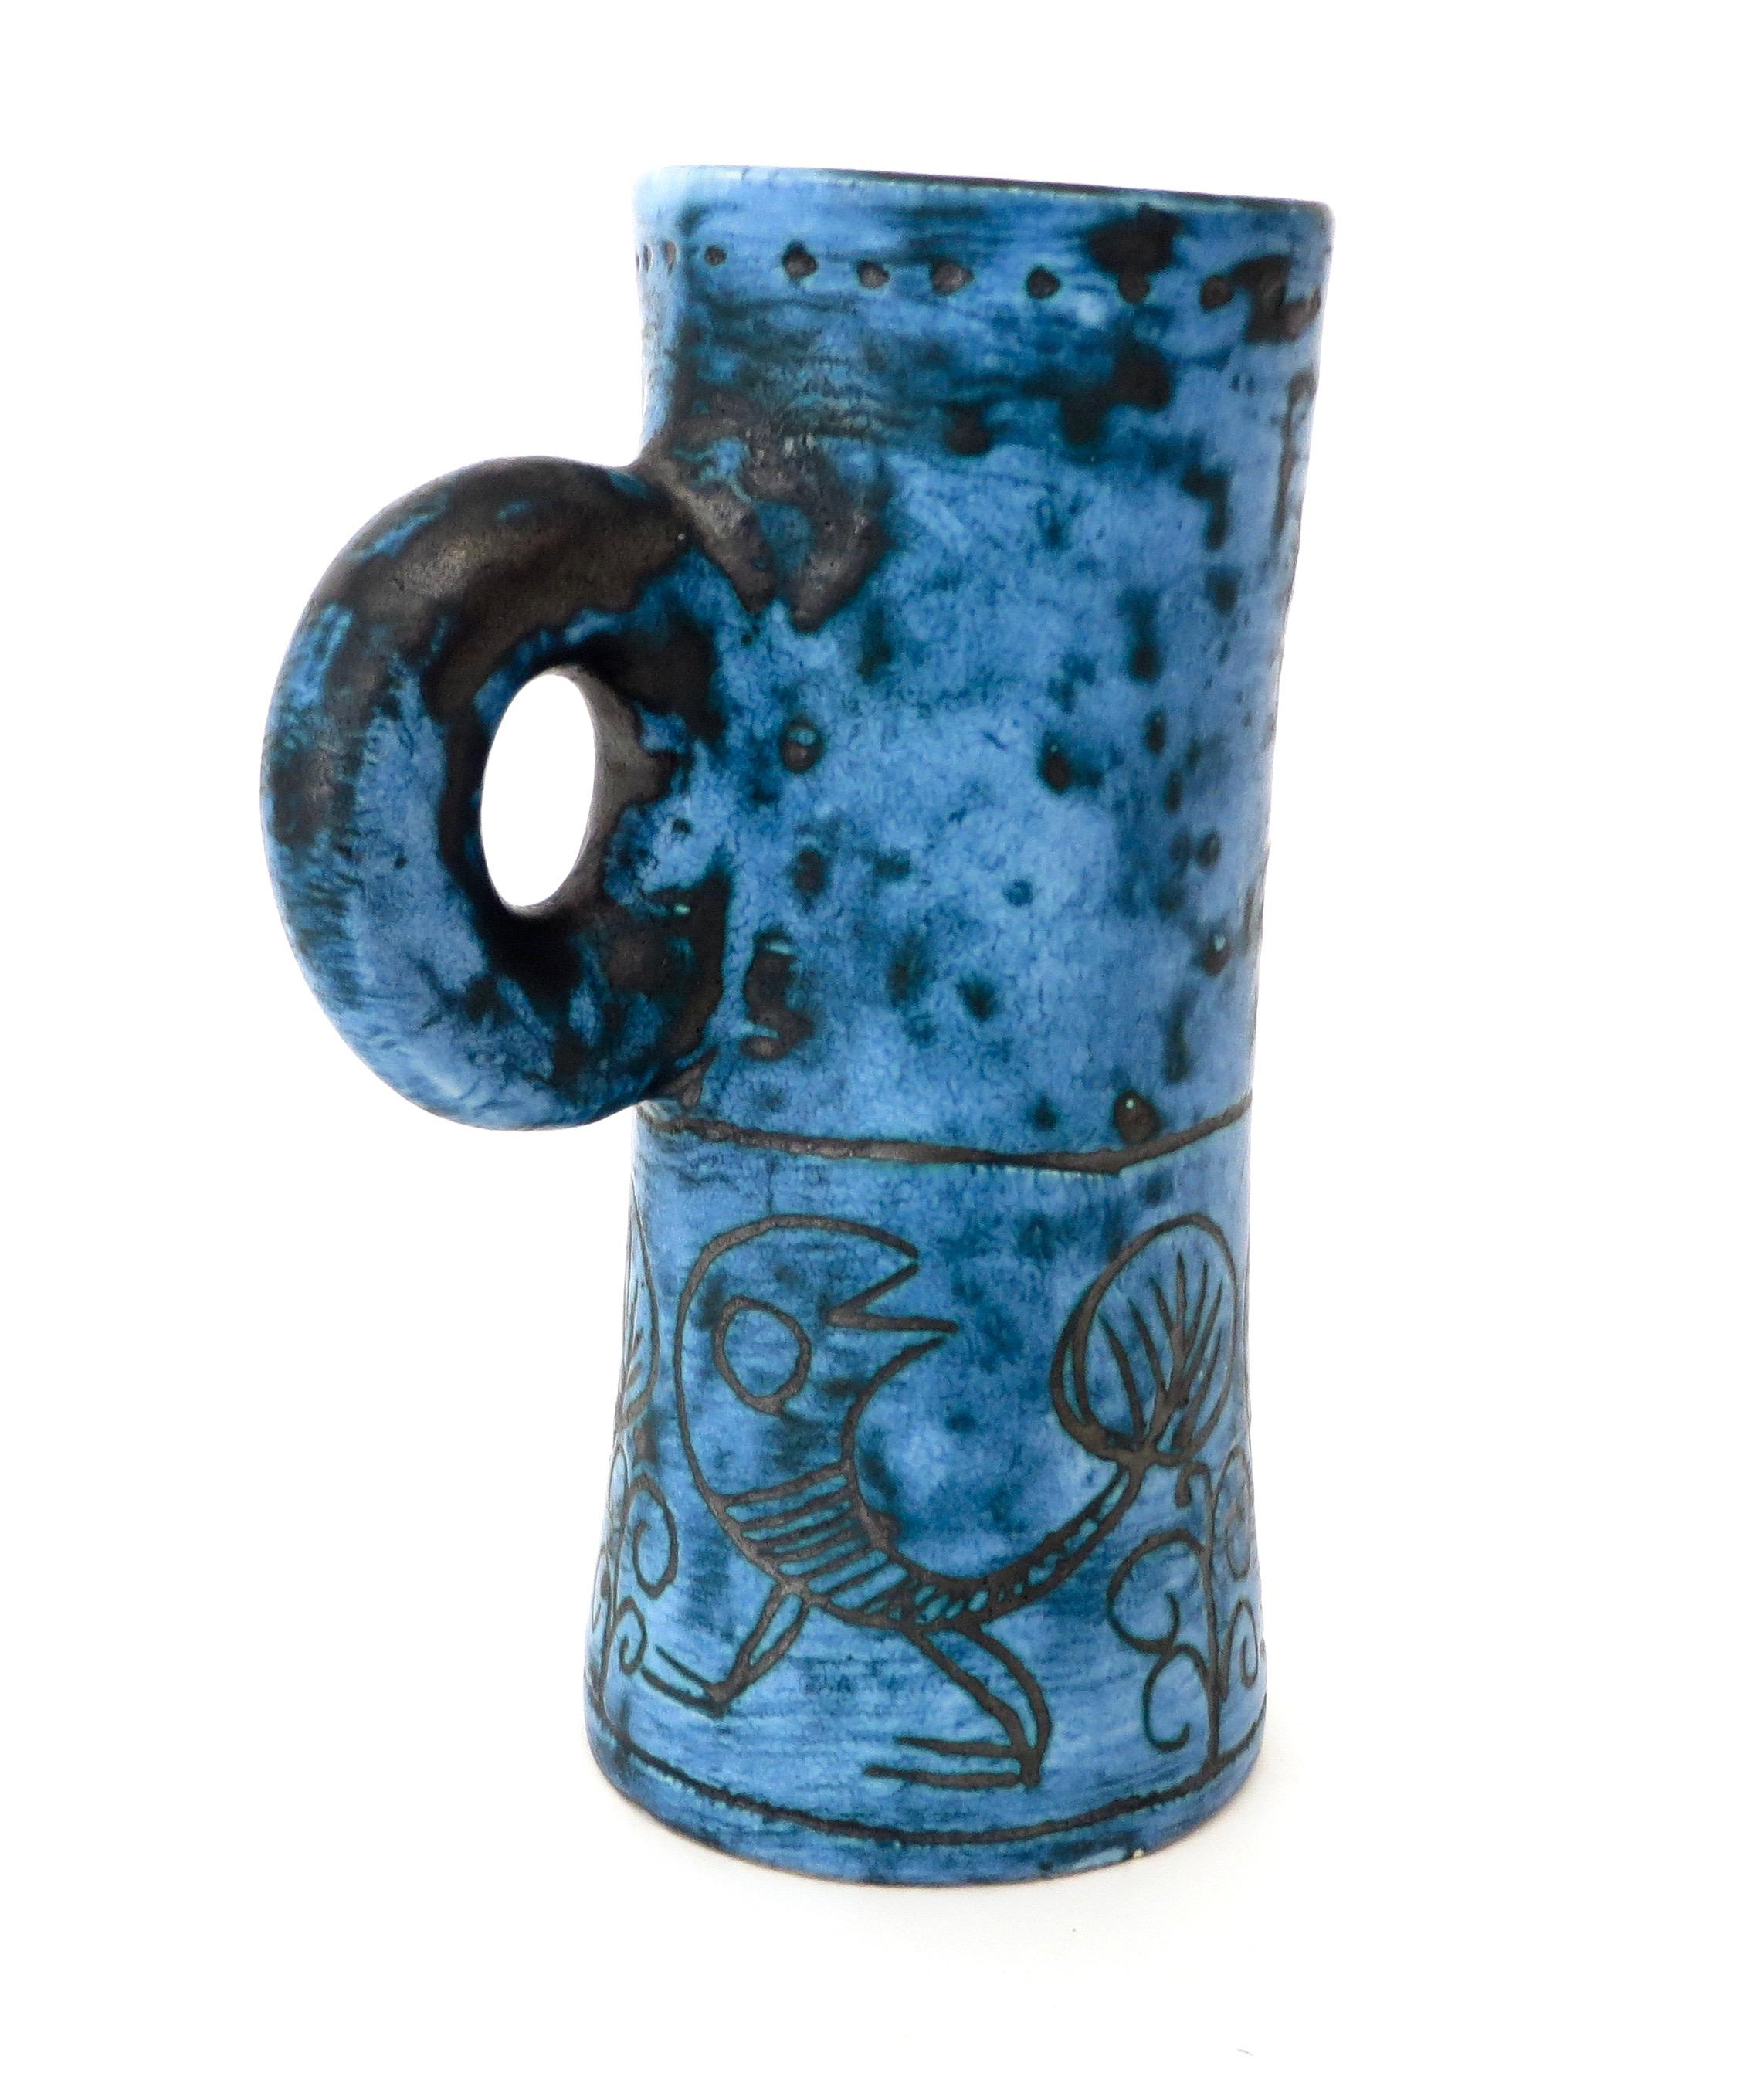 Mid-20th Century French Ceramic Artist Jacques Blin Dark Blue Sgraffito Ceramic Vase with Handle